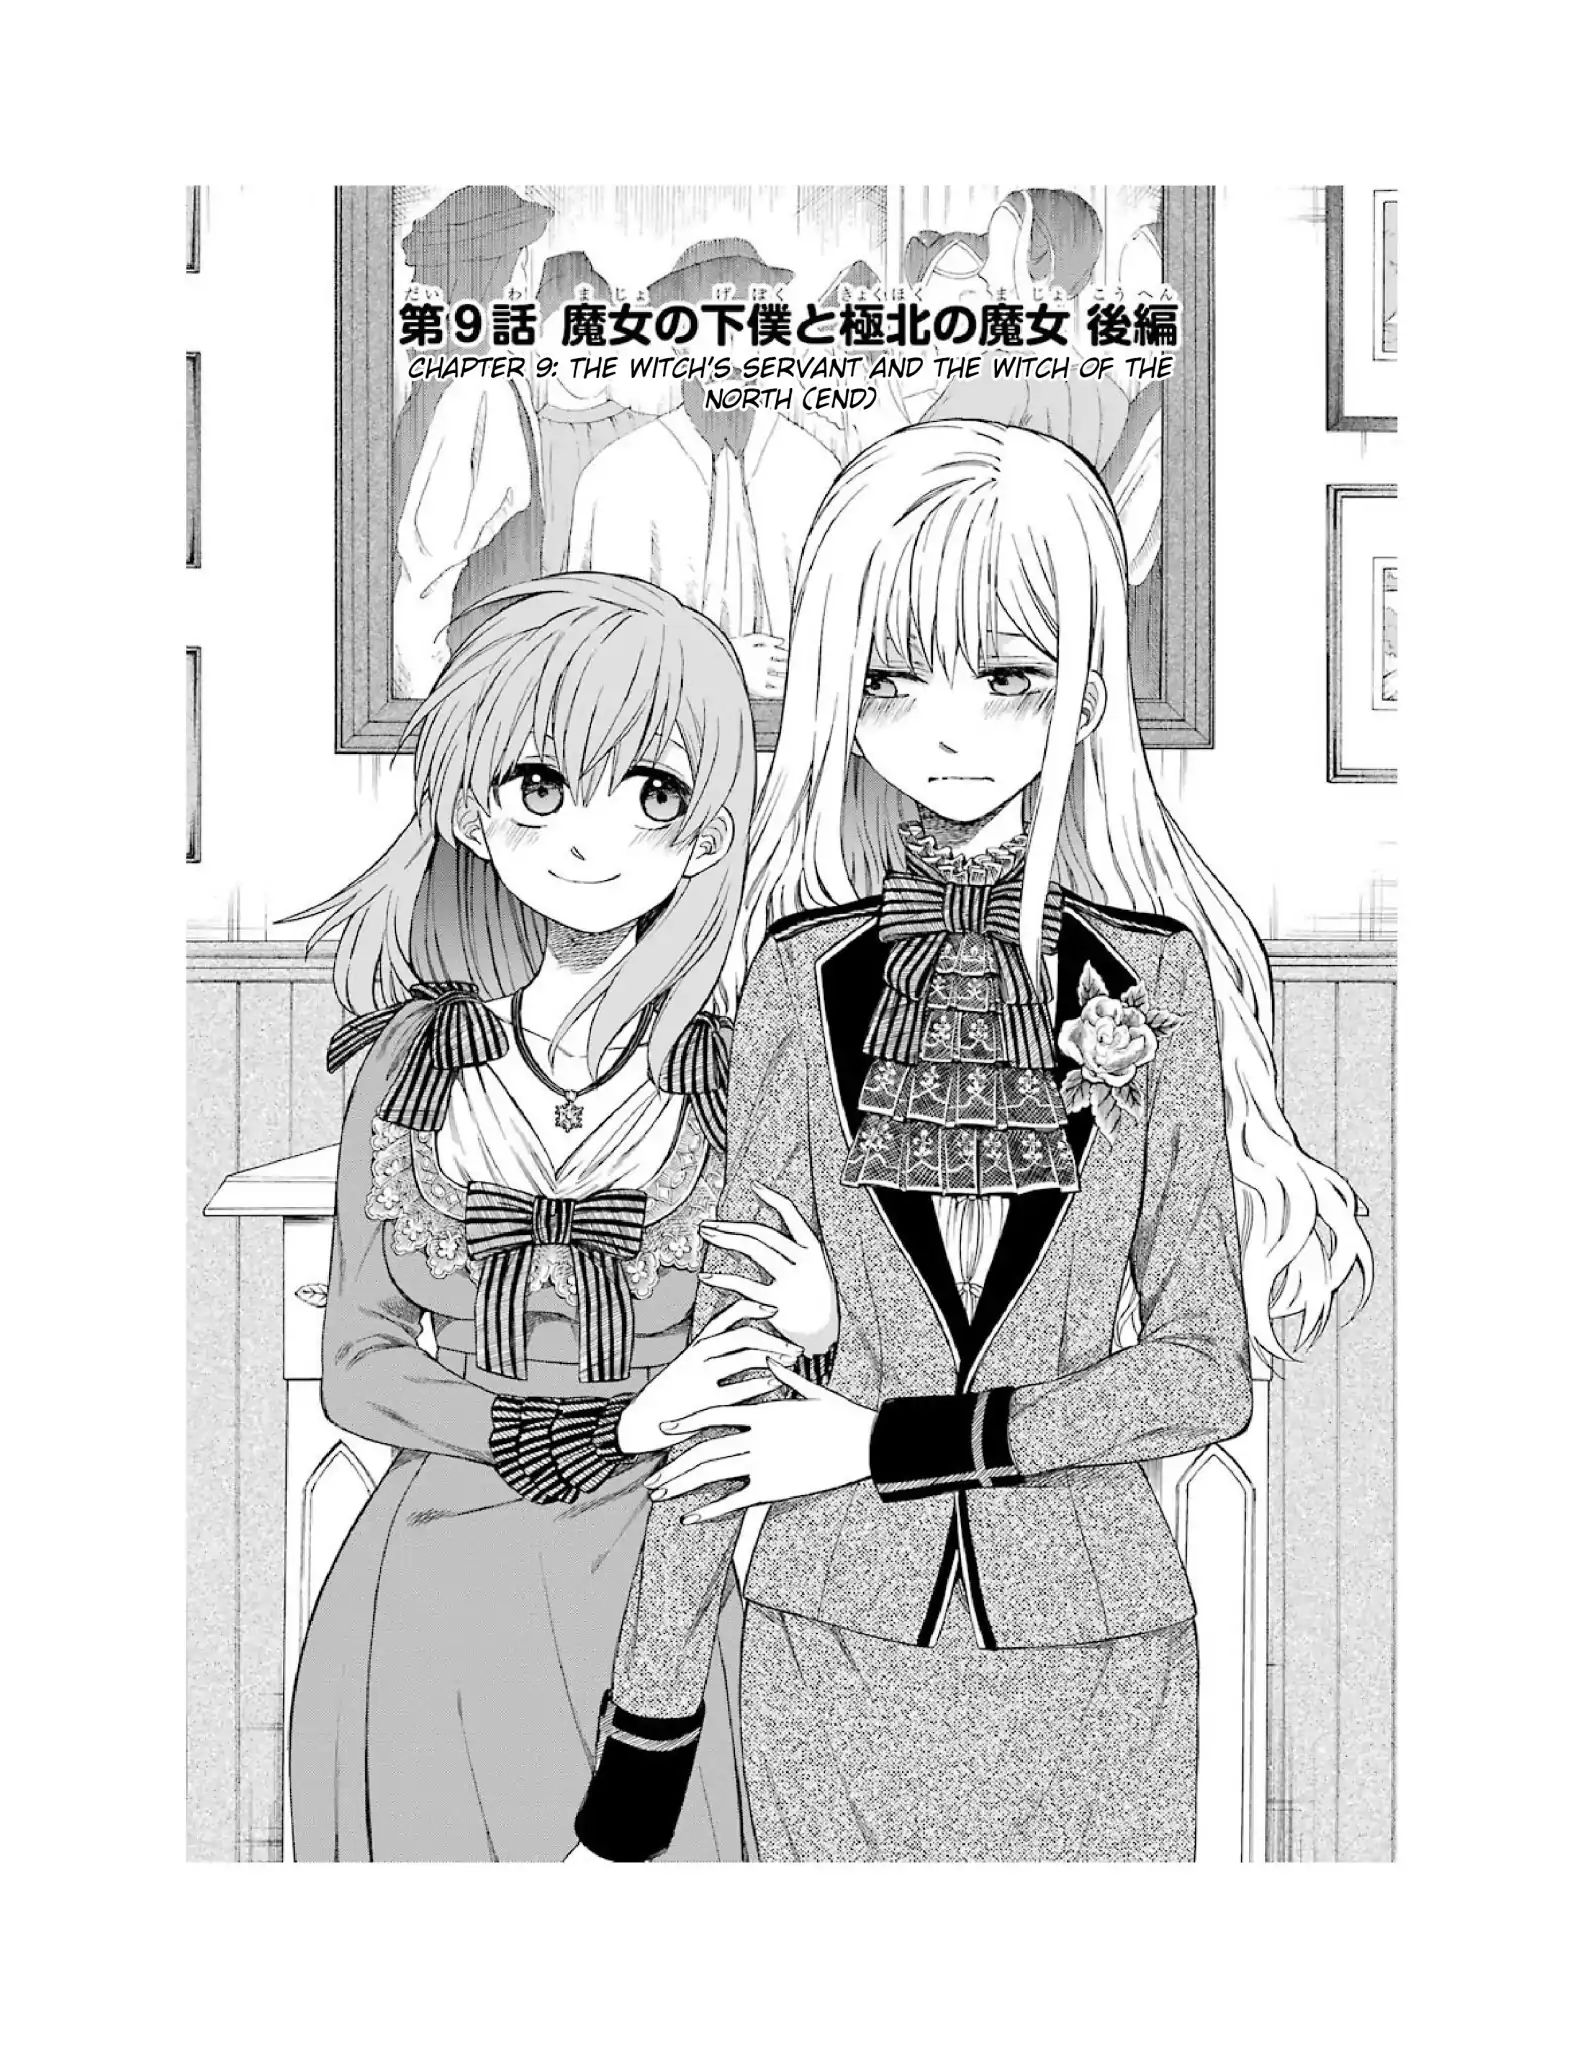 The Witch's Servant And The Demon Lords Horns Vol.2 Chapter 9: The Witch S Servant And The Witch Of The North (End) - Picture 2